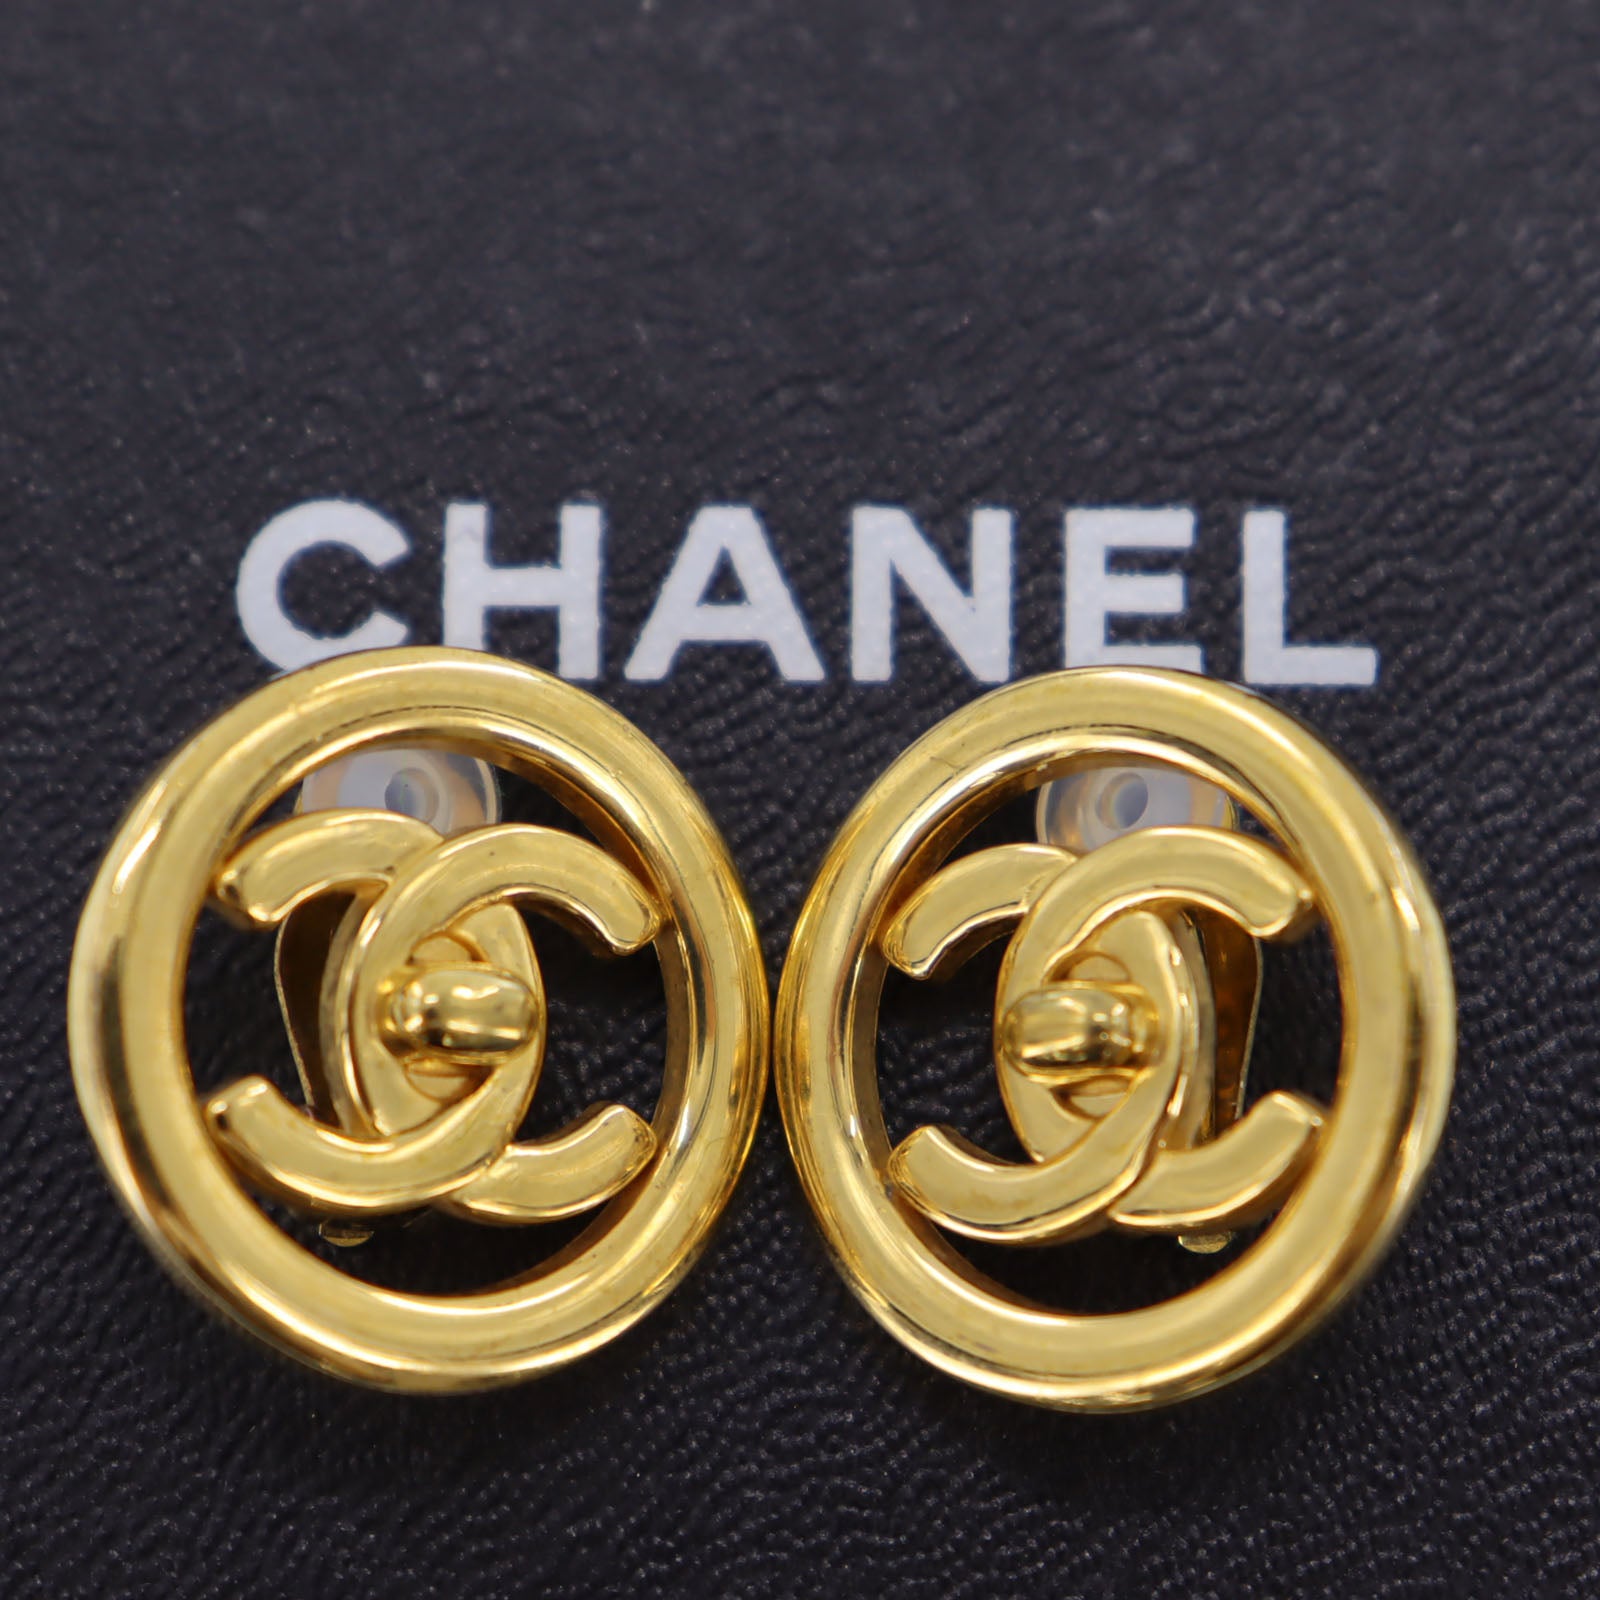 Vintage Chanel CC Turn Lock Clip-on Earrings Gold Plated, Women's